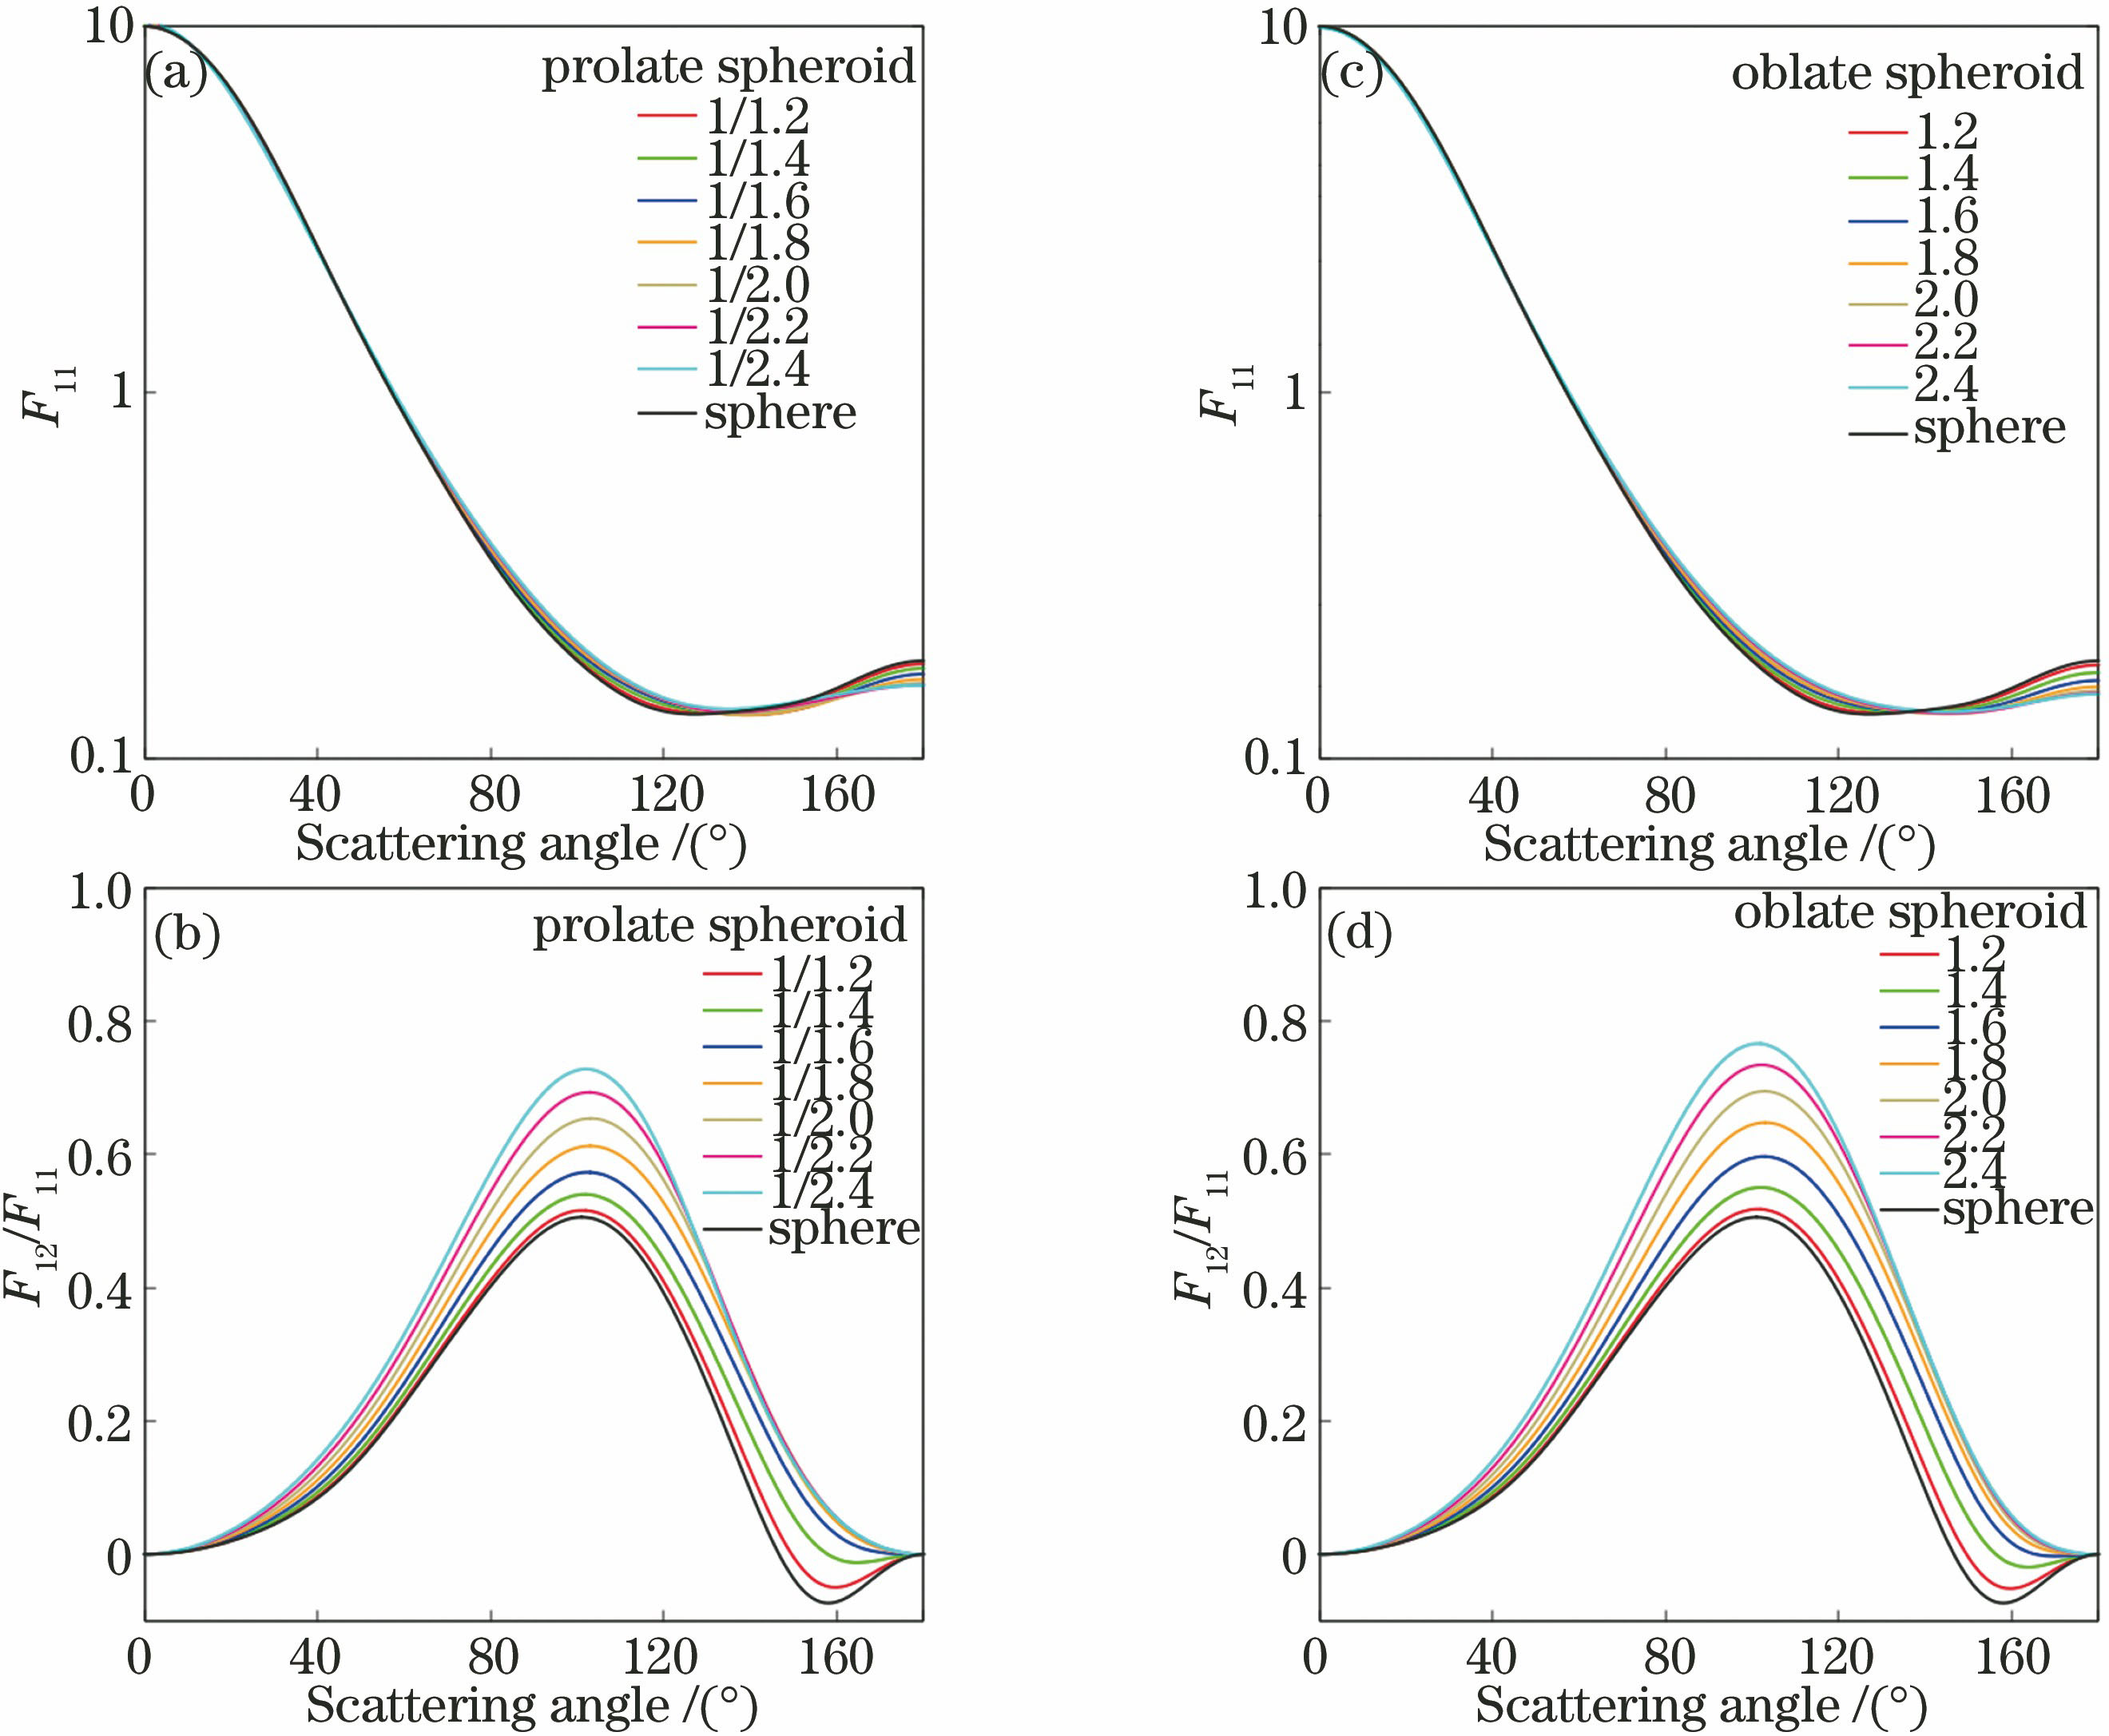 Phase functions and linear polarization degrees of ellipsoidal nonspherical particles with different aspect ratios in fine-mode state M4. (a) Prolate spheroid, F11; (b) prolate spheroid, -F12/F11; (c) oblate spheroid, F11; (d) oblate spheroid, -F12/F11